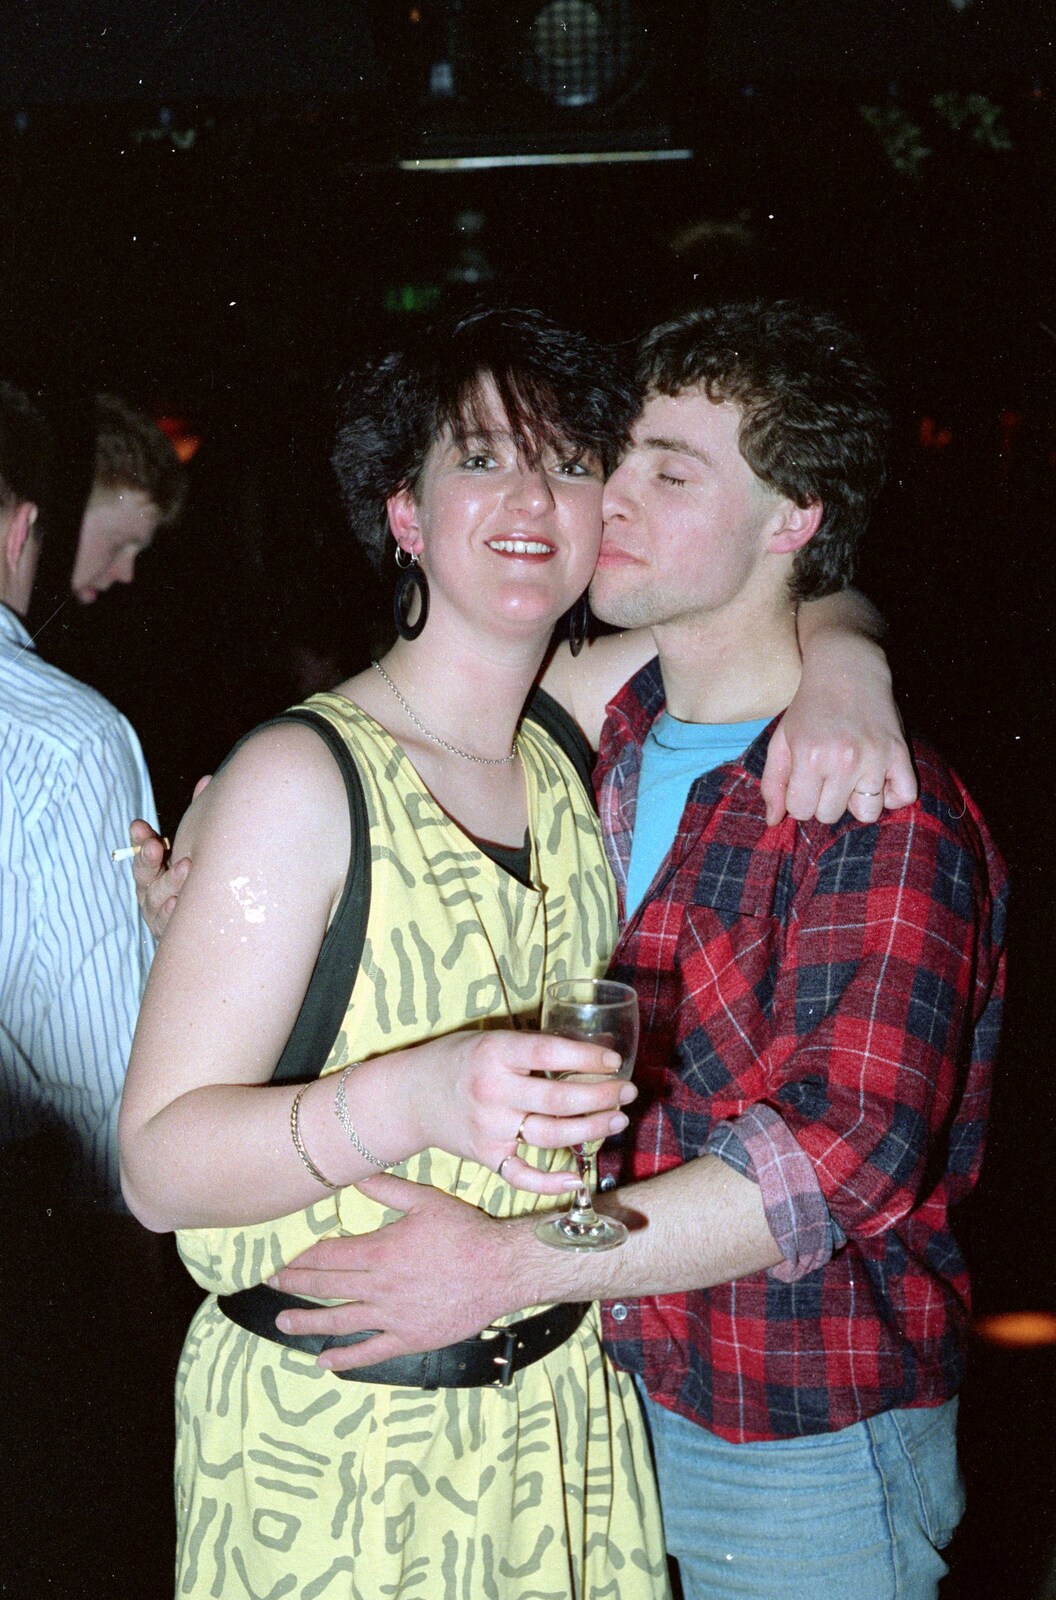 Another snog attempt from Uni: A Party in Snobs Nightclub, Mayflower Street, Plymouth - 18th October 1986